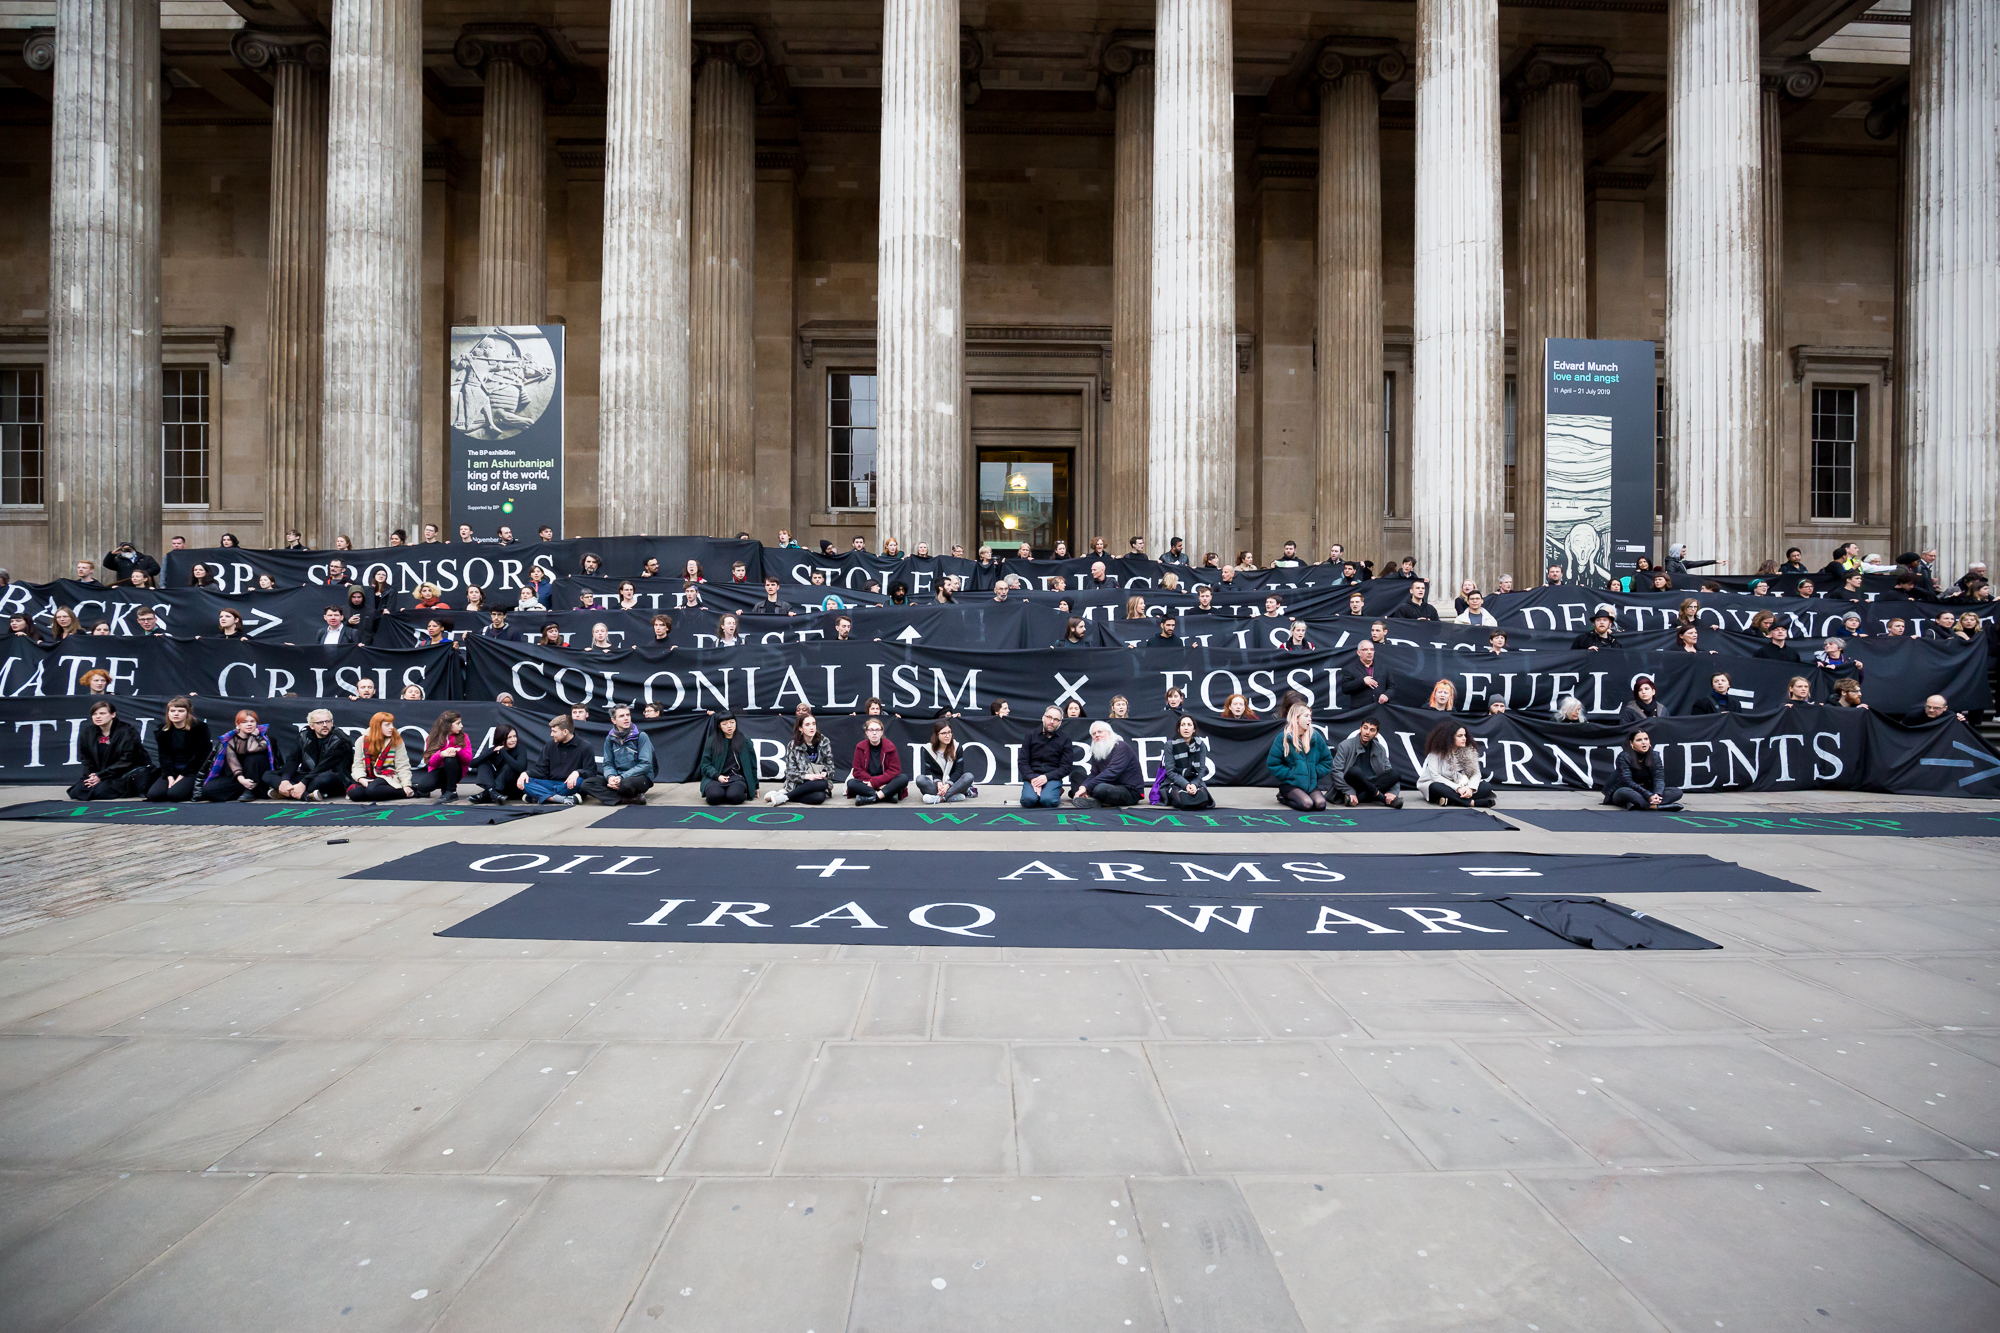 Protesters stand outside the British Museum in lines holding onto large banners/ a 'living tapestry' with messages about war, colonialism, the Iraq war and fossil fuels painted on